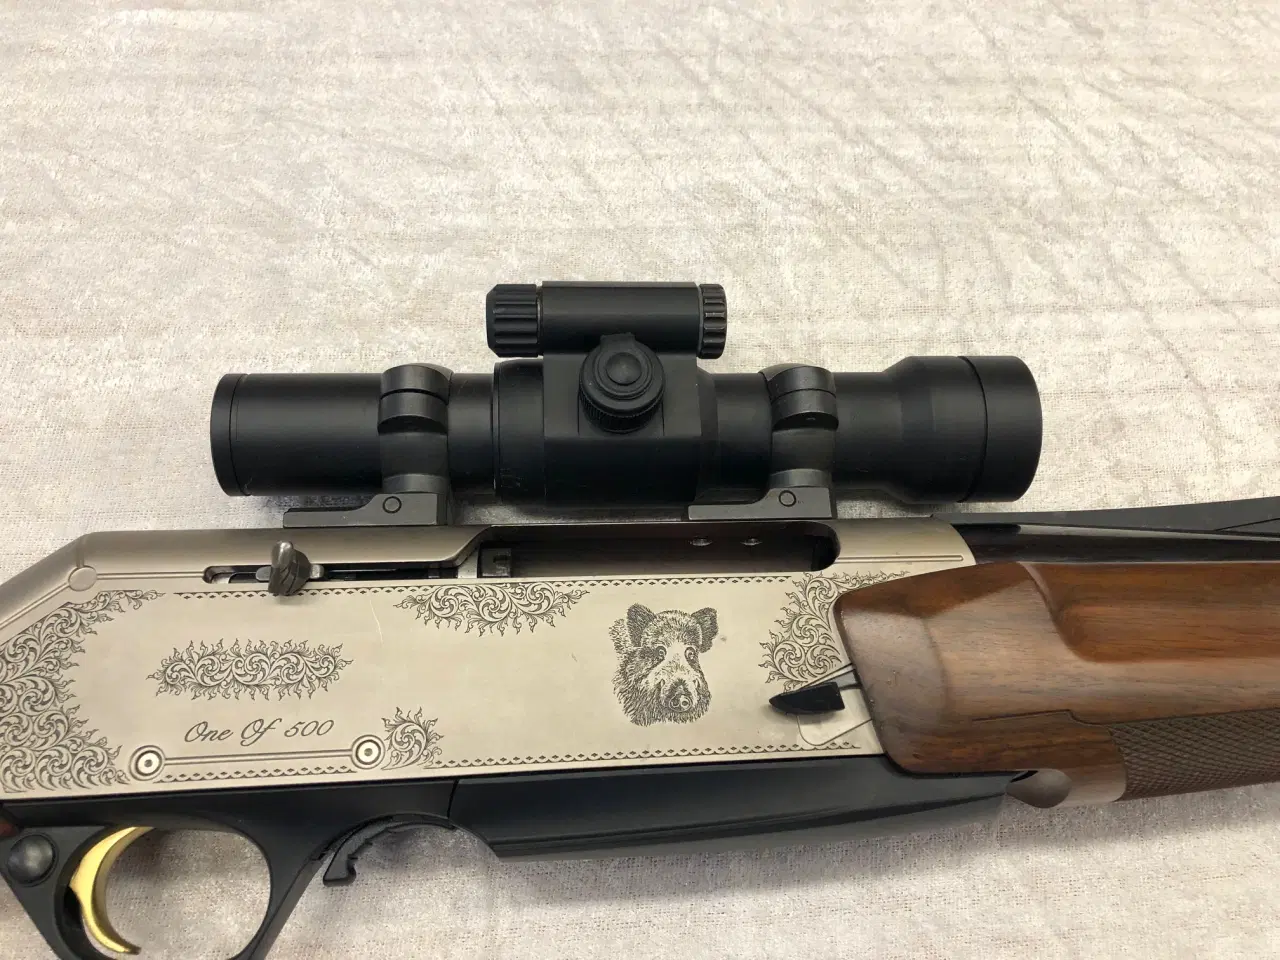 Billede 4 - Browning Bar + Aimpoint